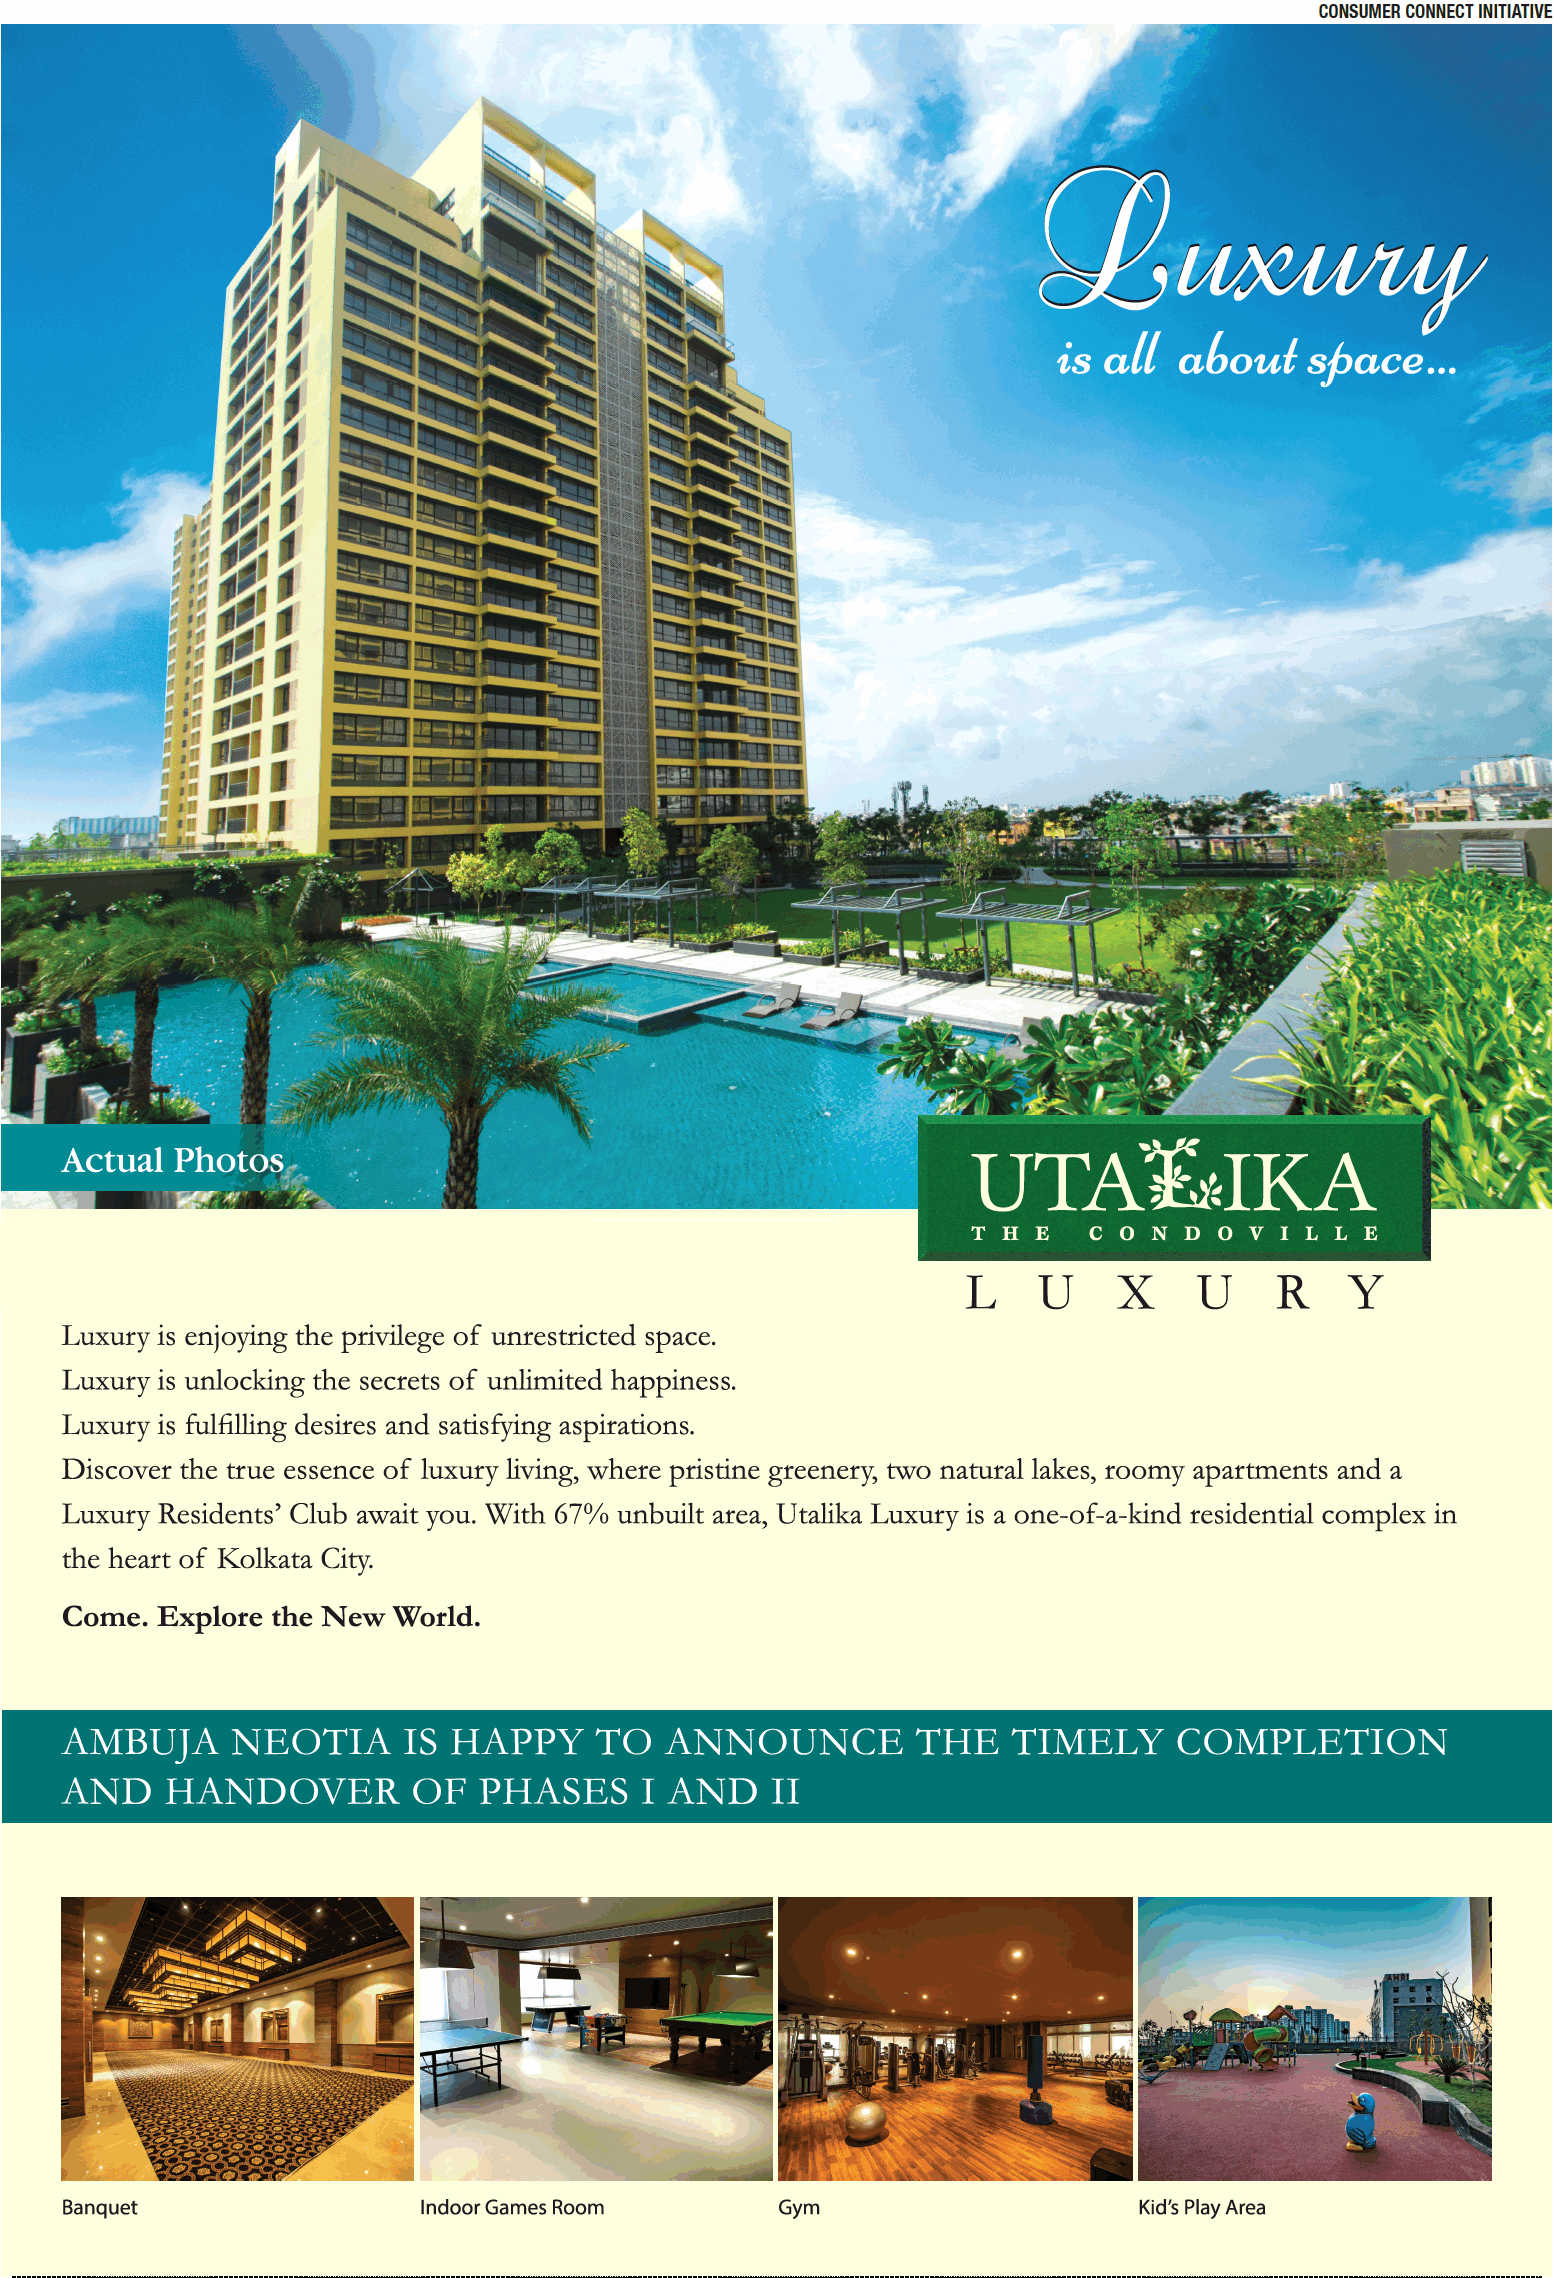 Ambuja Neotia Utalika is happy to announce the timely completion and handover of phases 1 and 2 in Kolkata Update